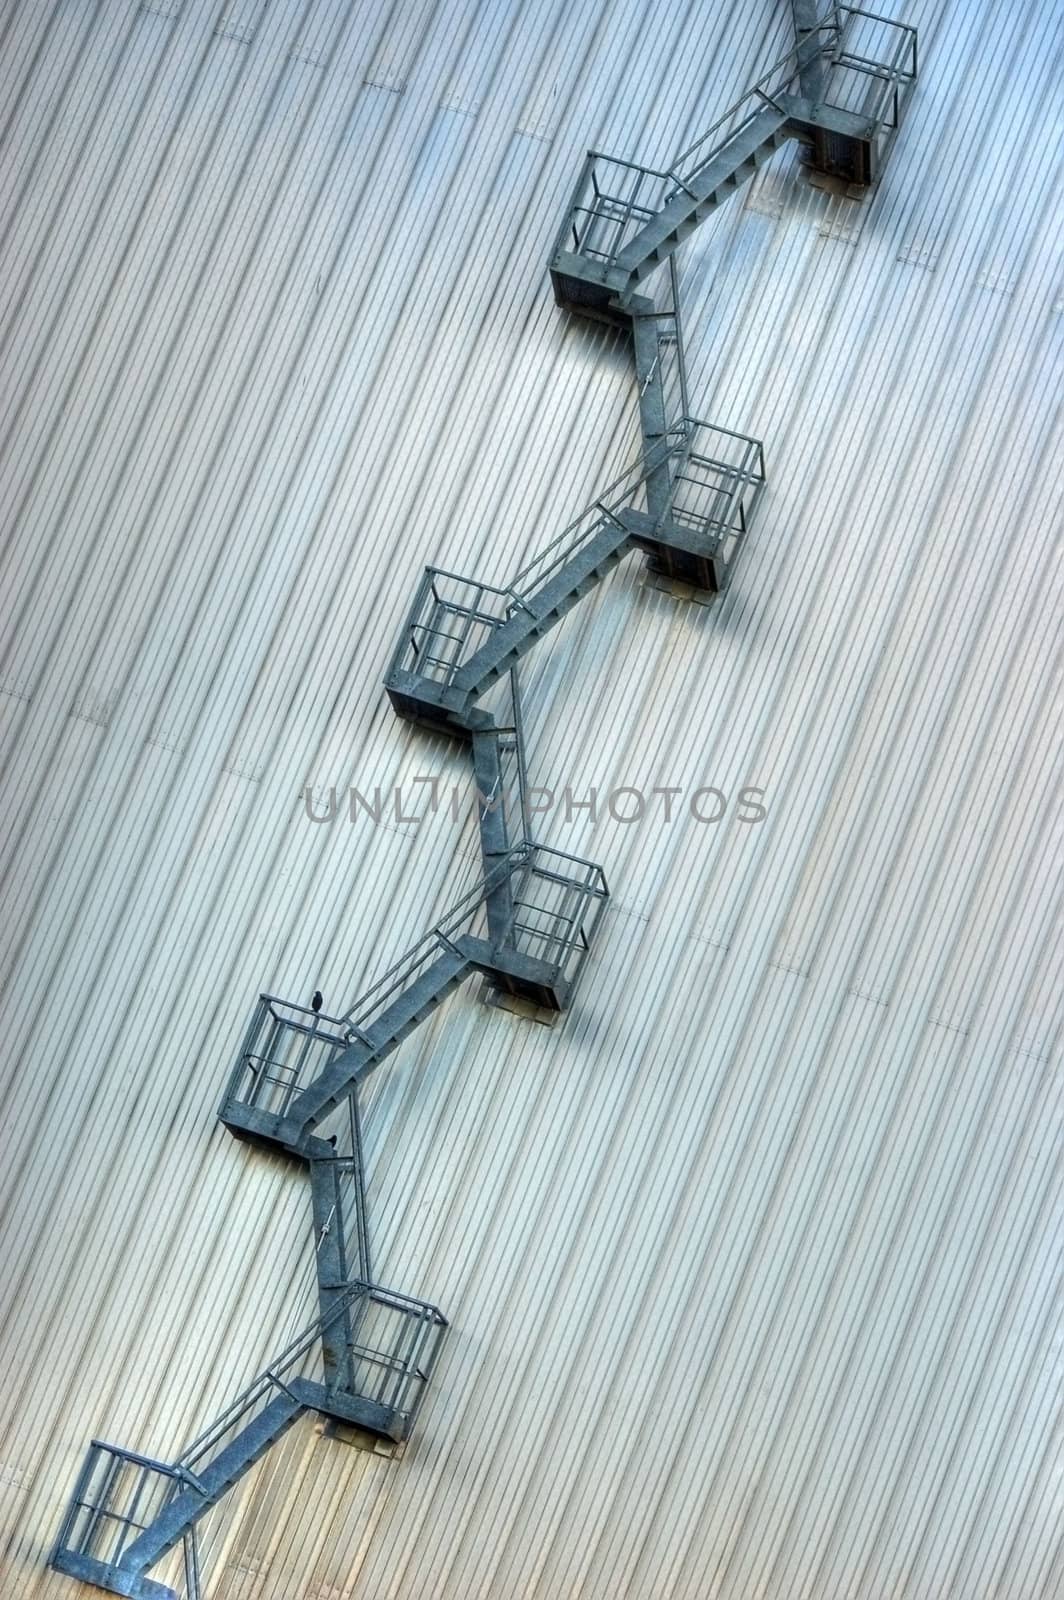 A Metalic Industrial Photo of a Ladder from a Hanger